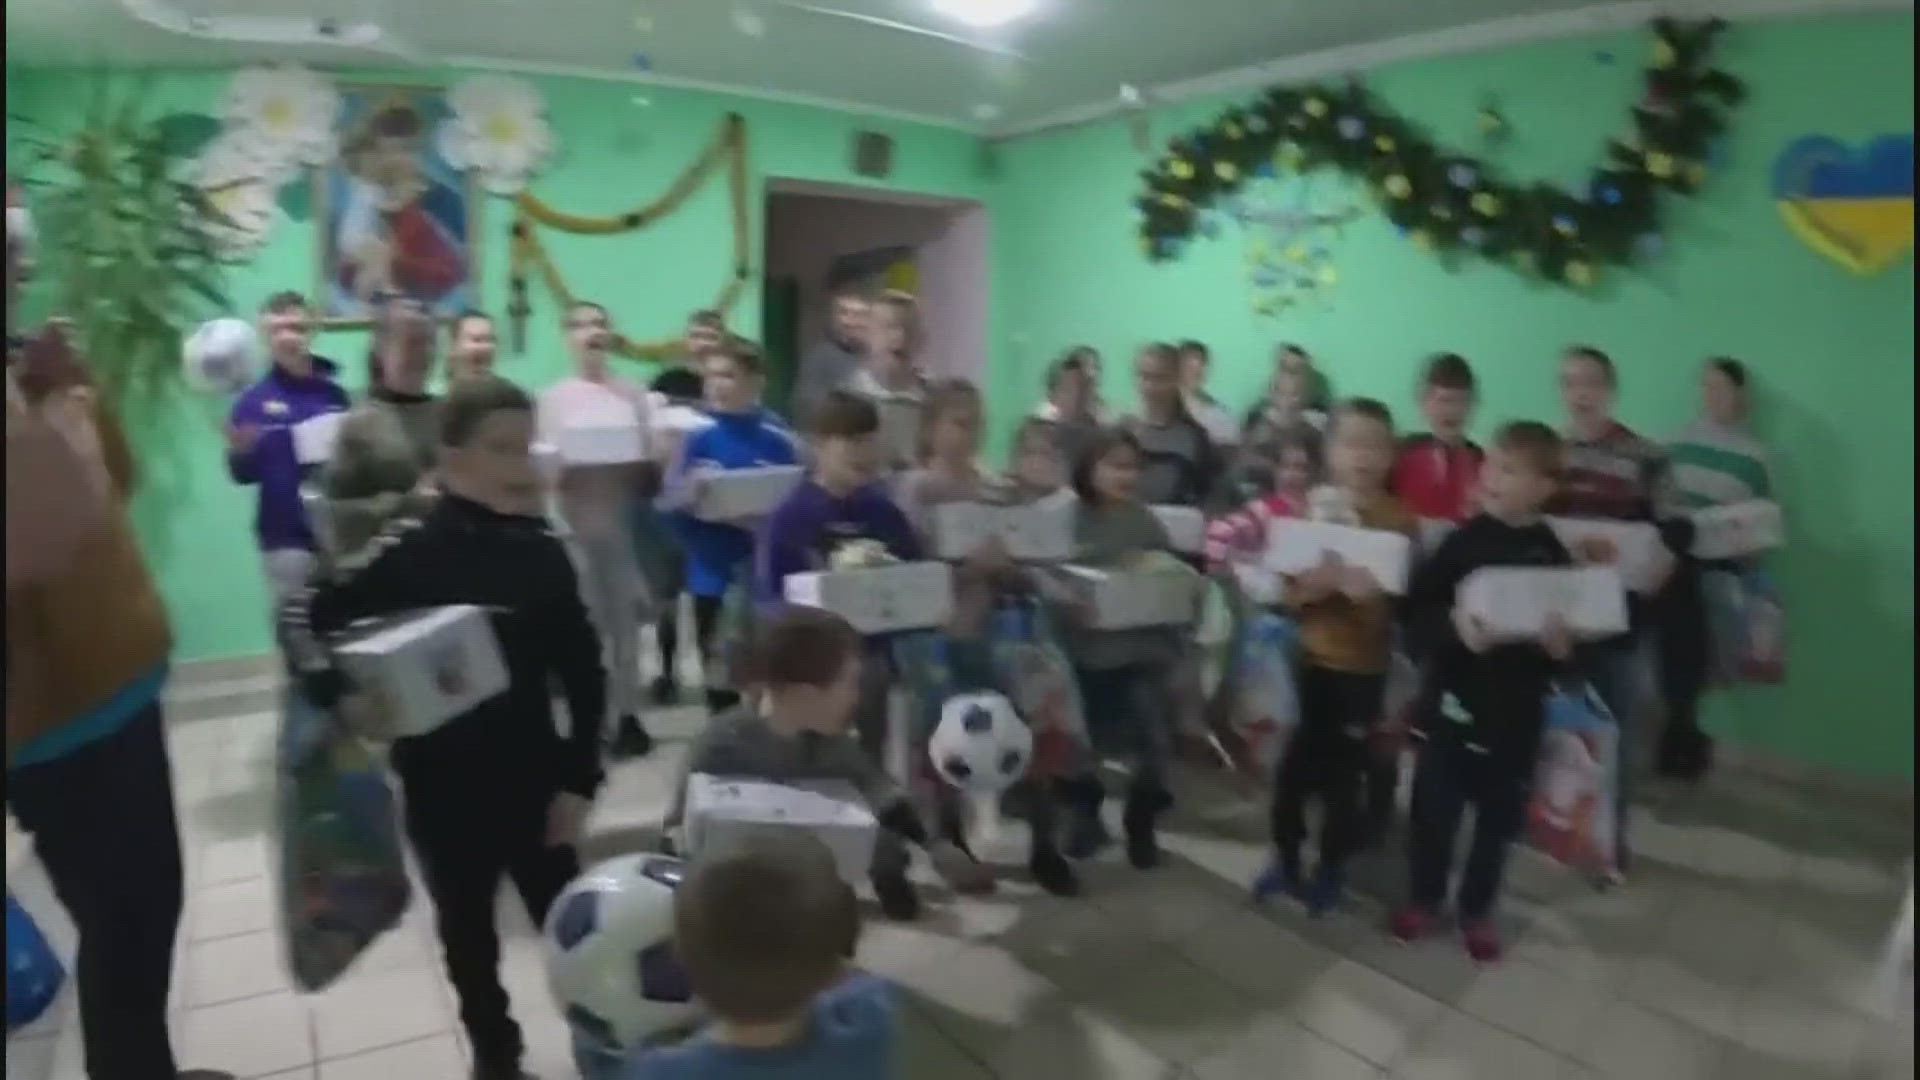 Common Man For Ukraine has distributed more than $3 million in humanitarian aid to survivors.